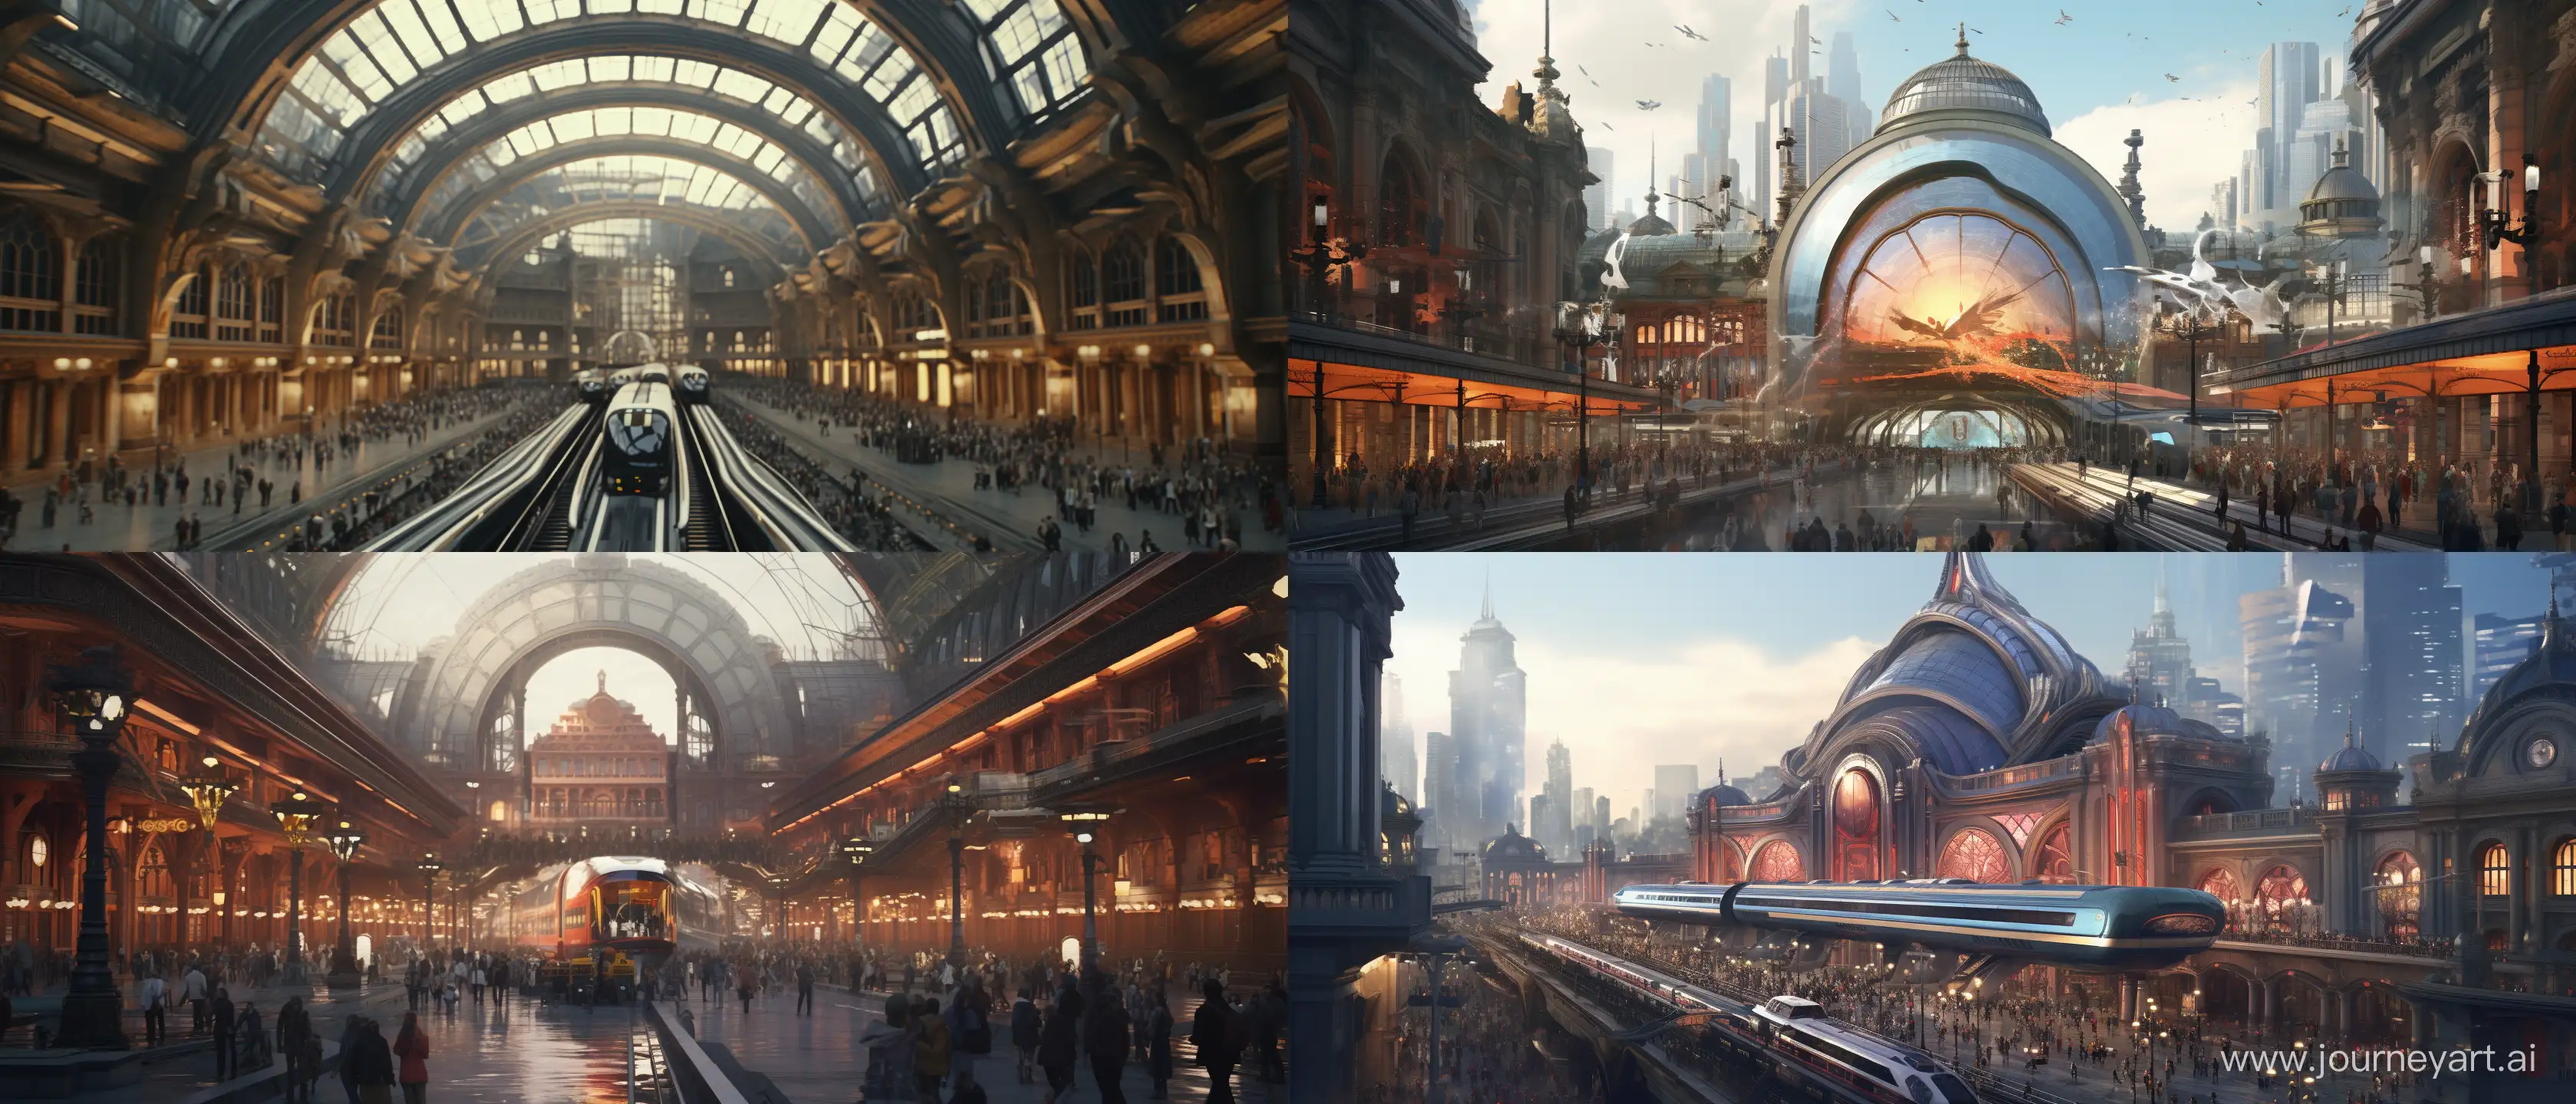 https://live.staticflickr.com/65535/28750503495_b19bb37f2a_b.jpg, Craft a Cybernetic Surrealism-inspired digital artwork of central station with dense crowd set at 2077 ultra realistic 4k cinematic, wide angle --ar 21:9 --iw 1